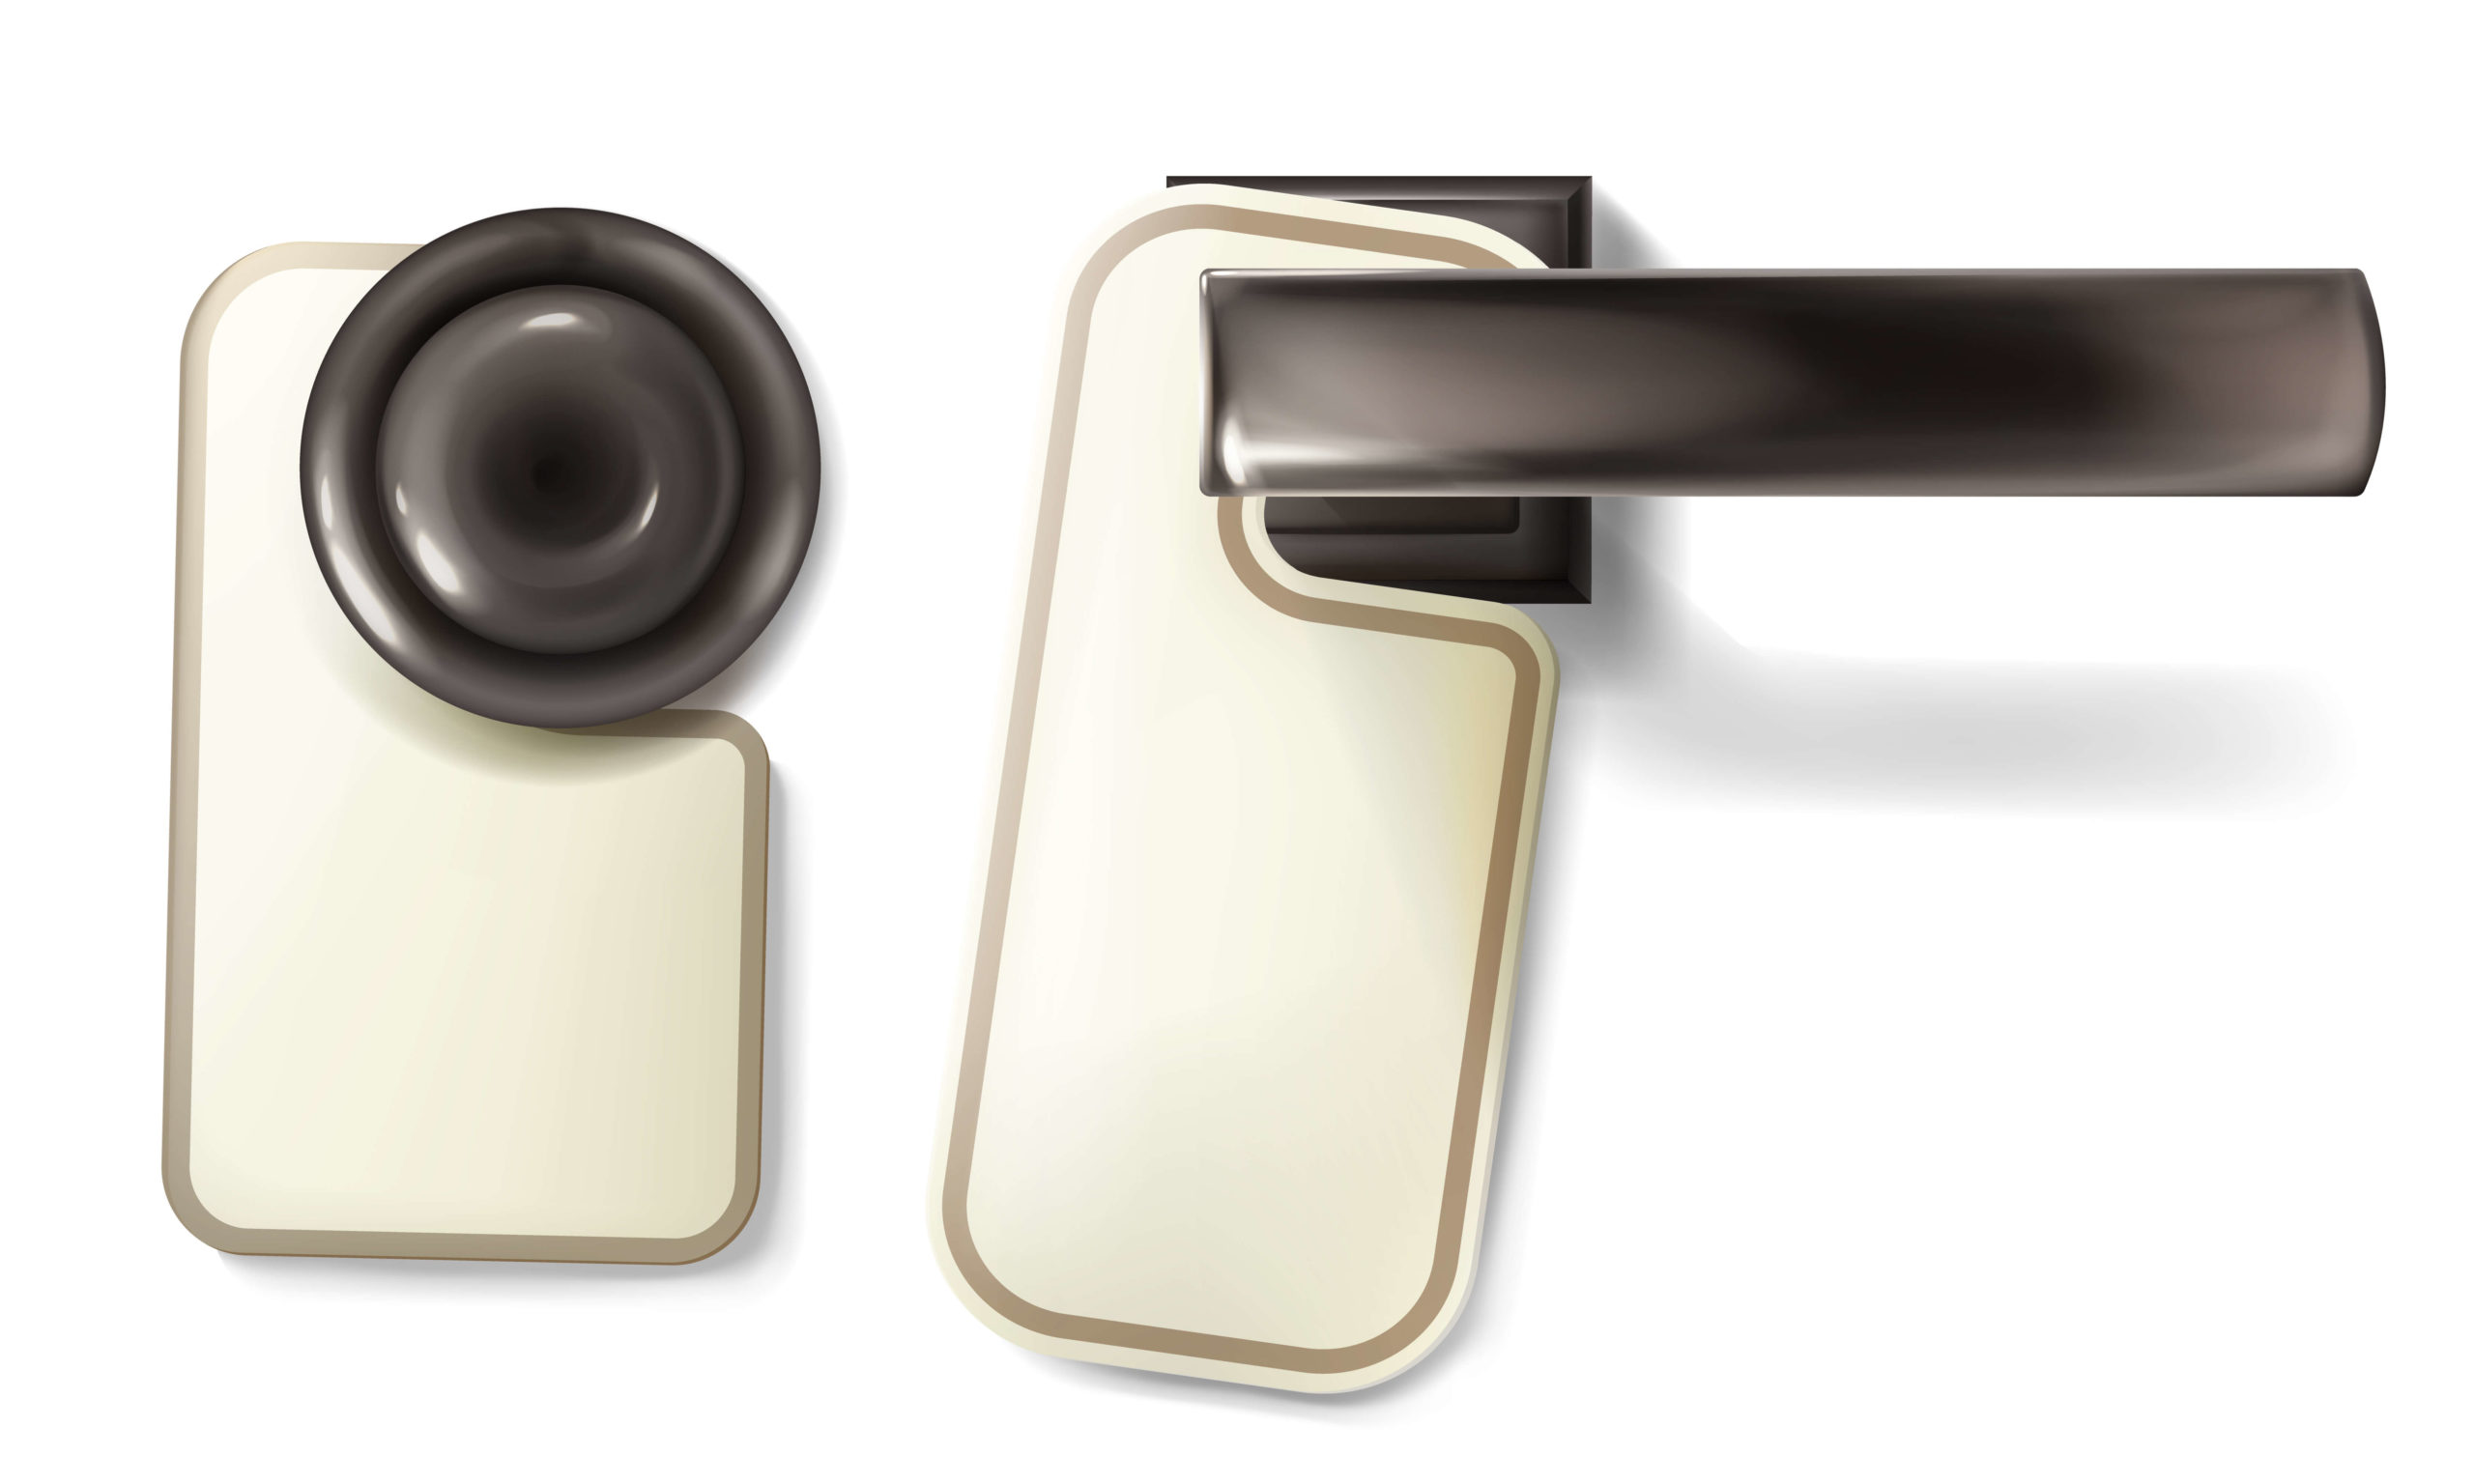 Various Types of Door Lock Systems and Hardware